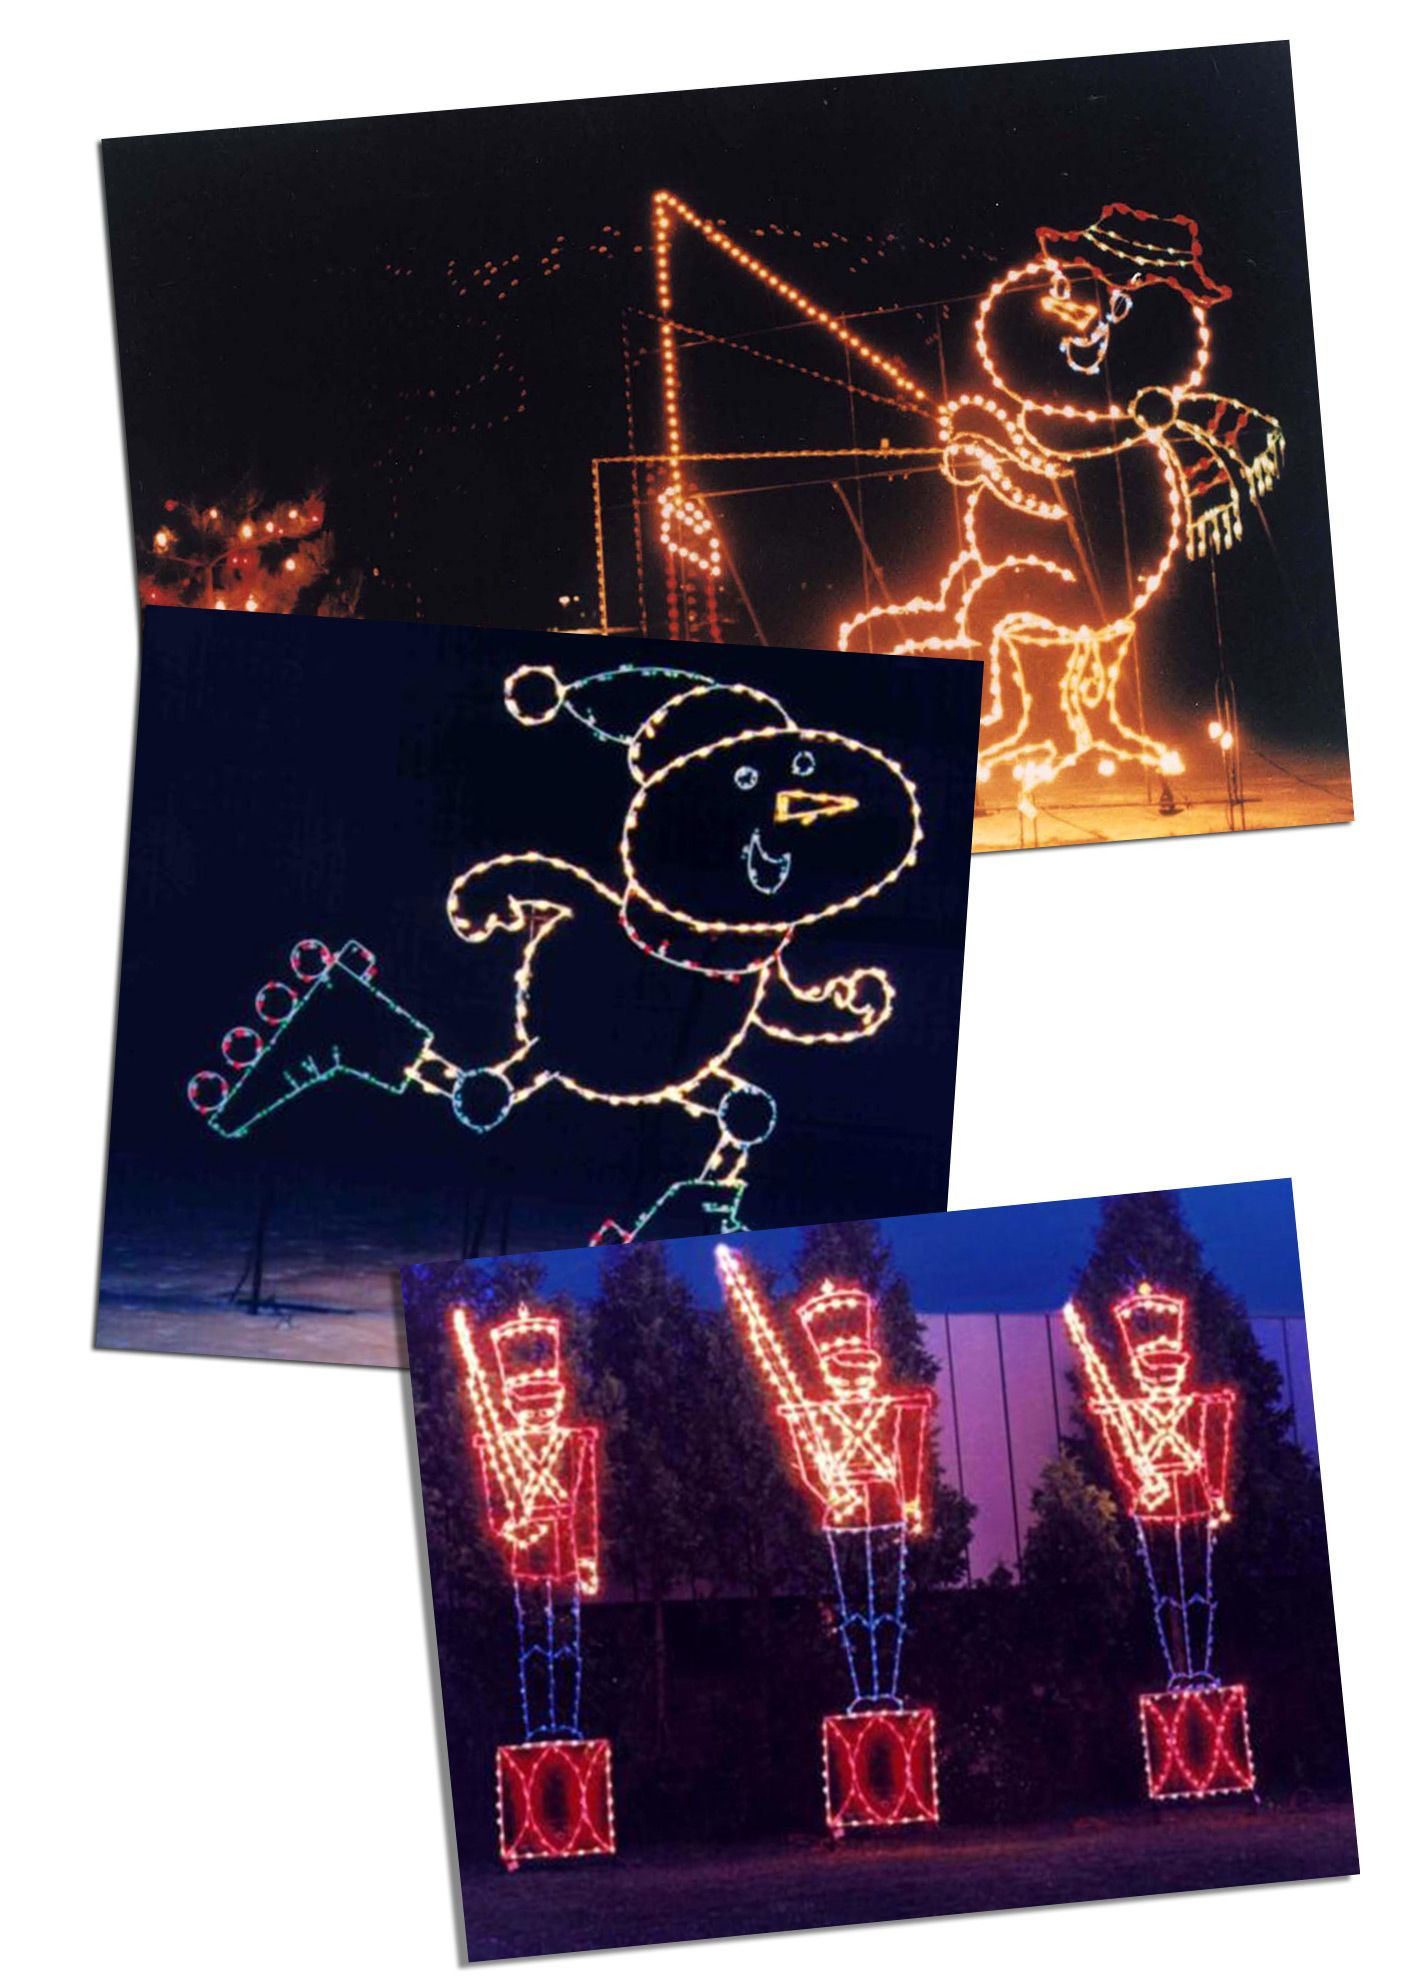 South Gate Christmas Parade
 St Paul MN Phalen Lake 2014 Holiday Lights in the